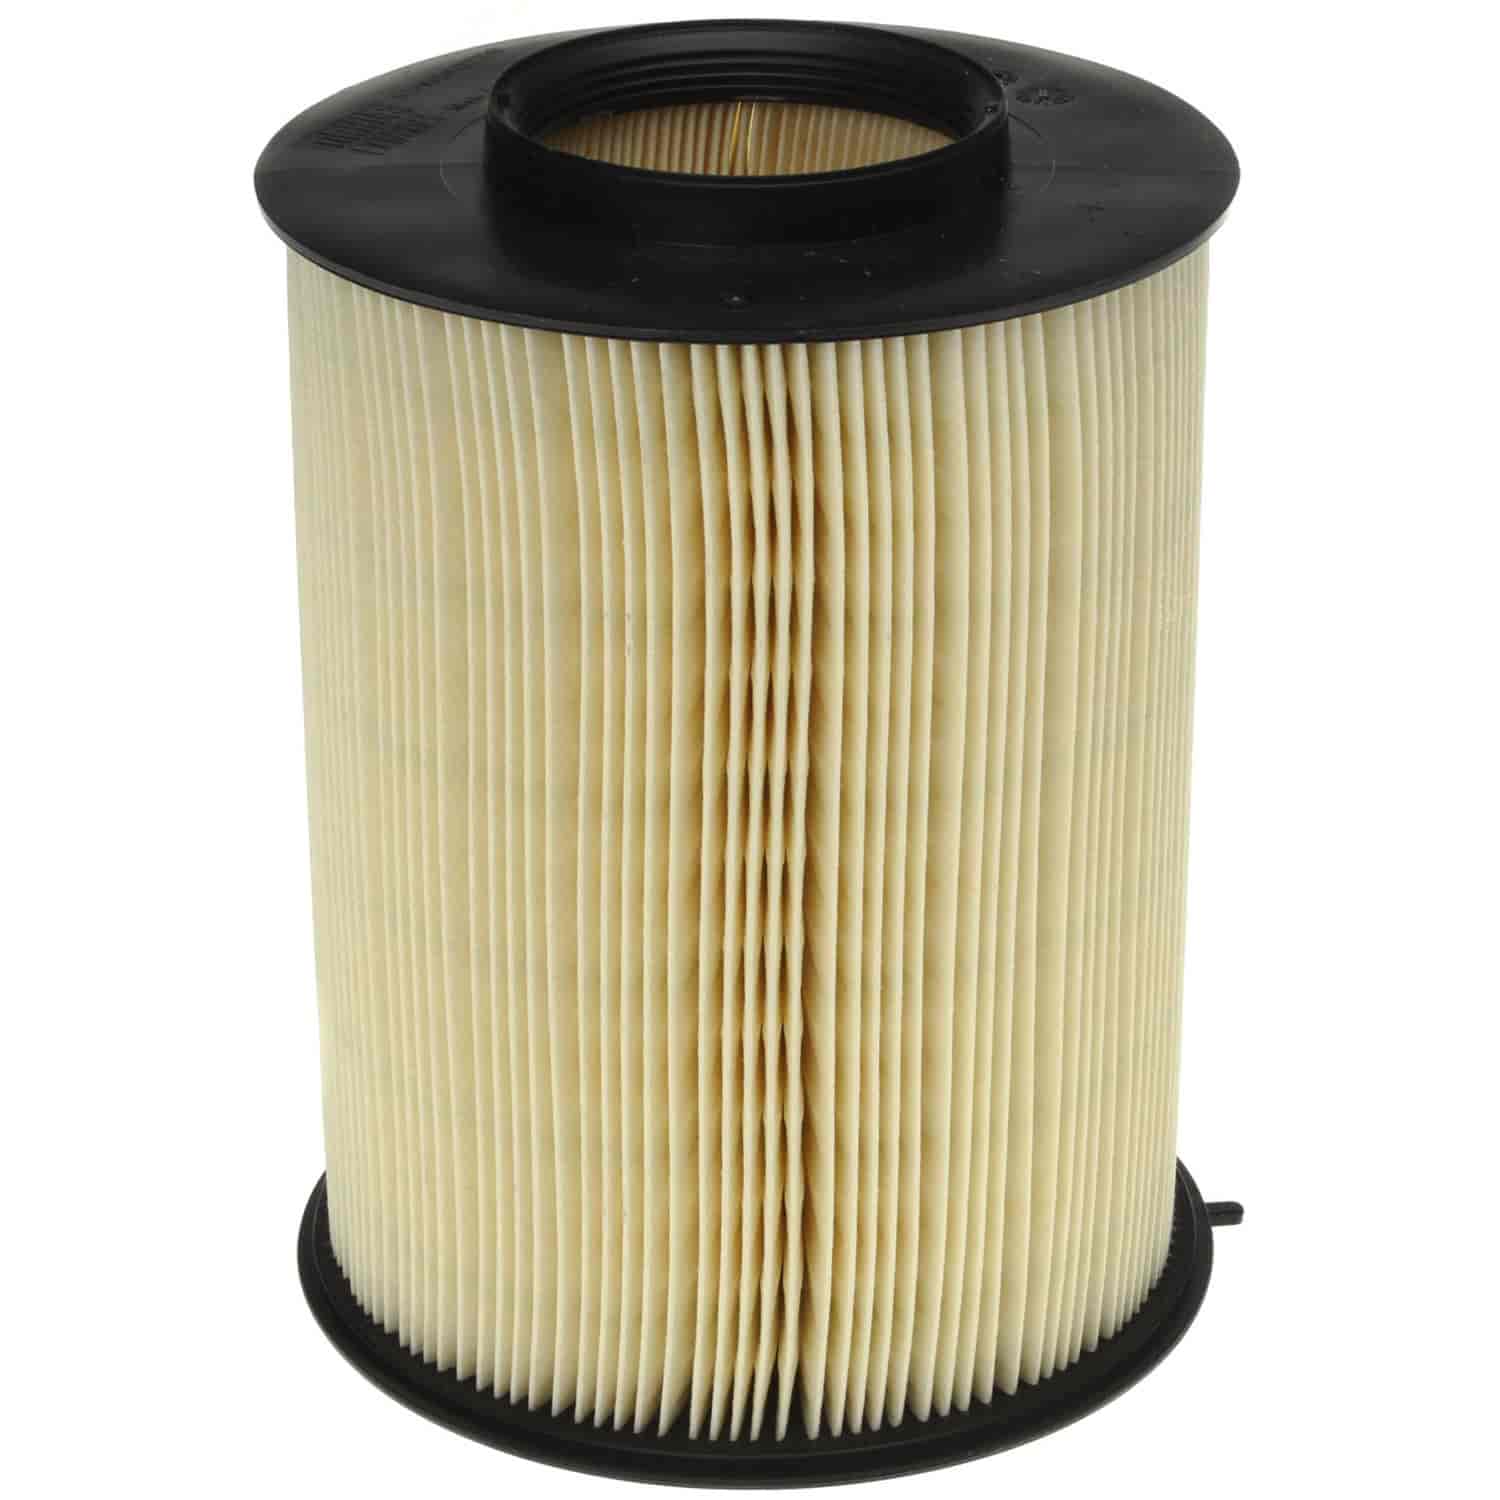 Mahle Air Filter Ford Focus 2.0L VIN 2 and 9 2012 Ford C-MAX 2.0L 2012